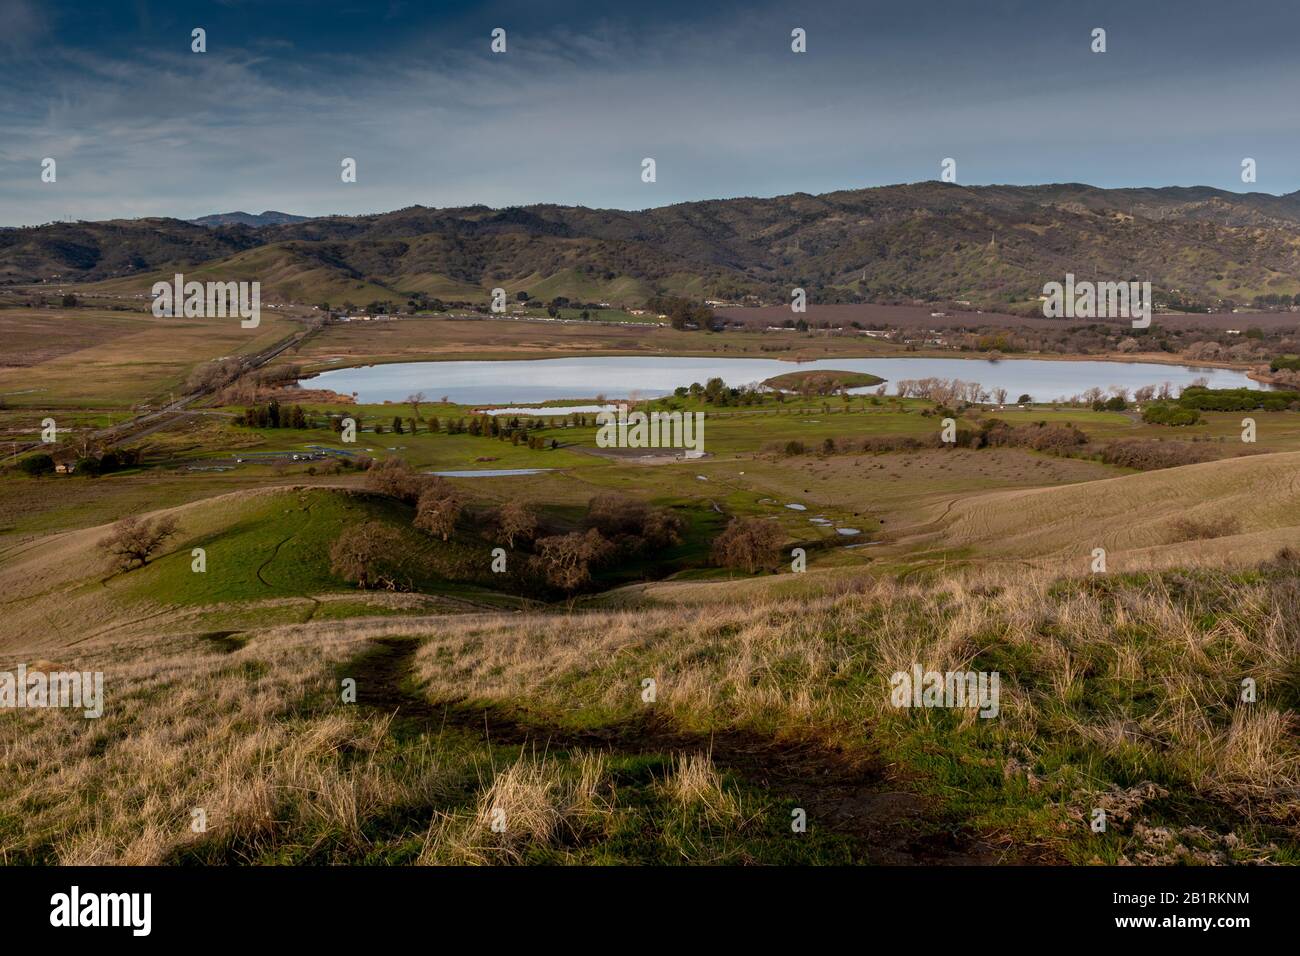 The Lagoon Valley Park in Vacaville, California, USA, viewed from a hill, including the highway I-80 and a lake Stock Photo